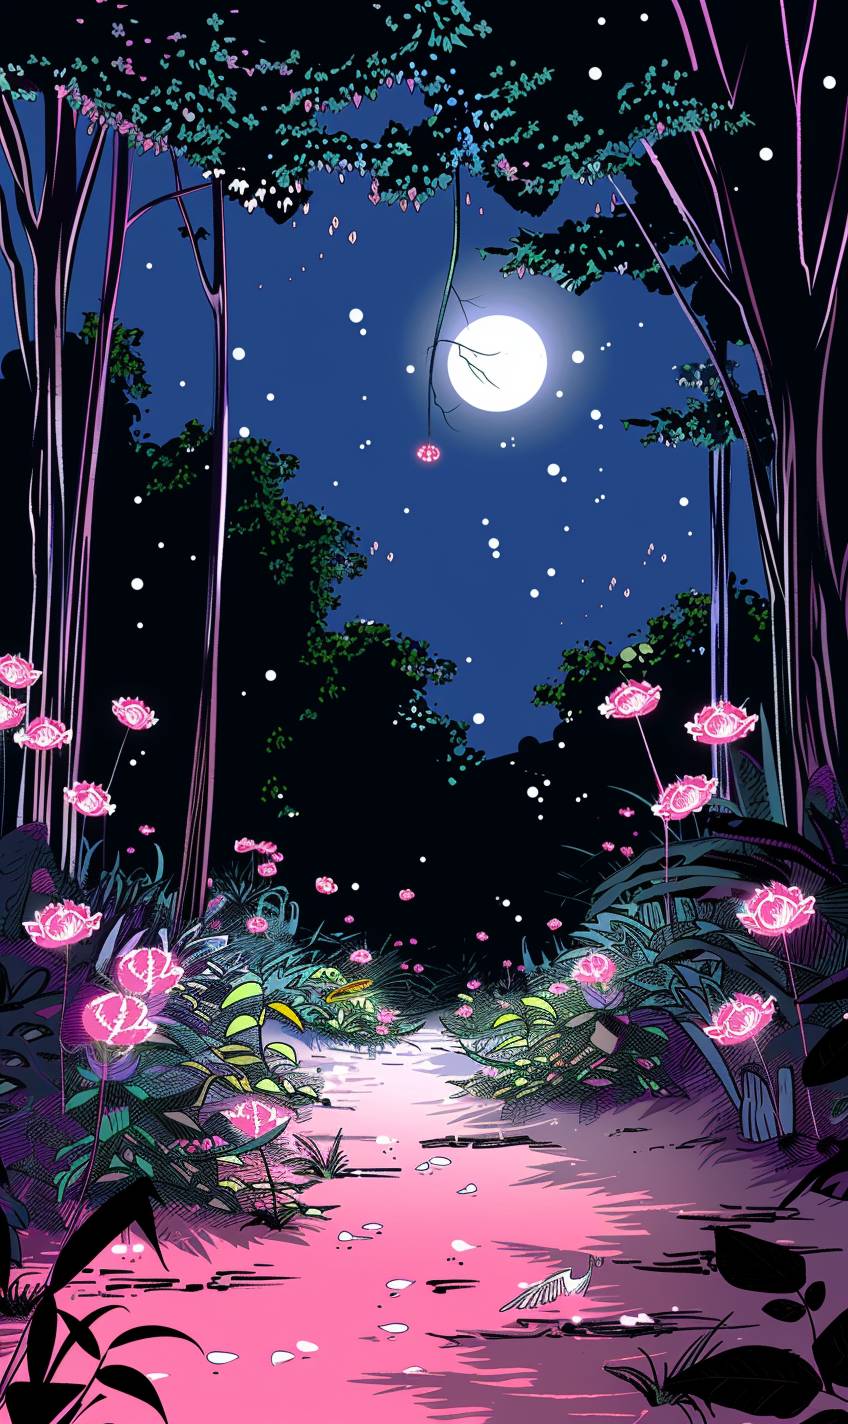 A mysterious enchanted forest with glowing plants, mythical creatures, and a gentle mist, soft moonlight creating an ethereal atmosphere